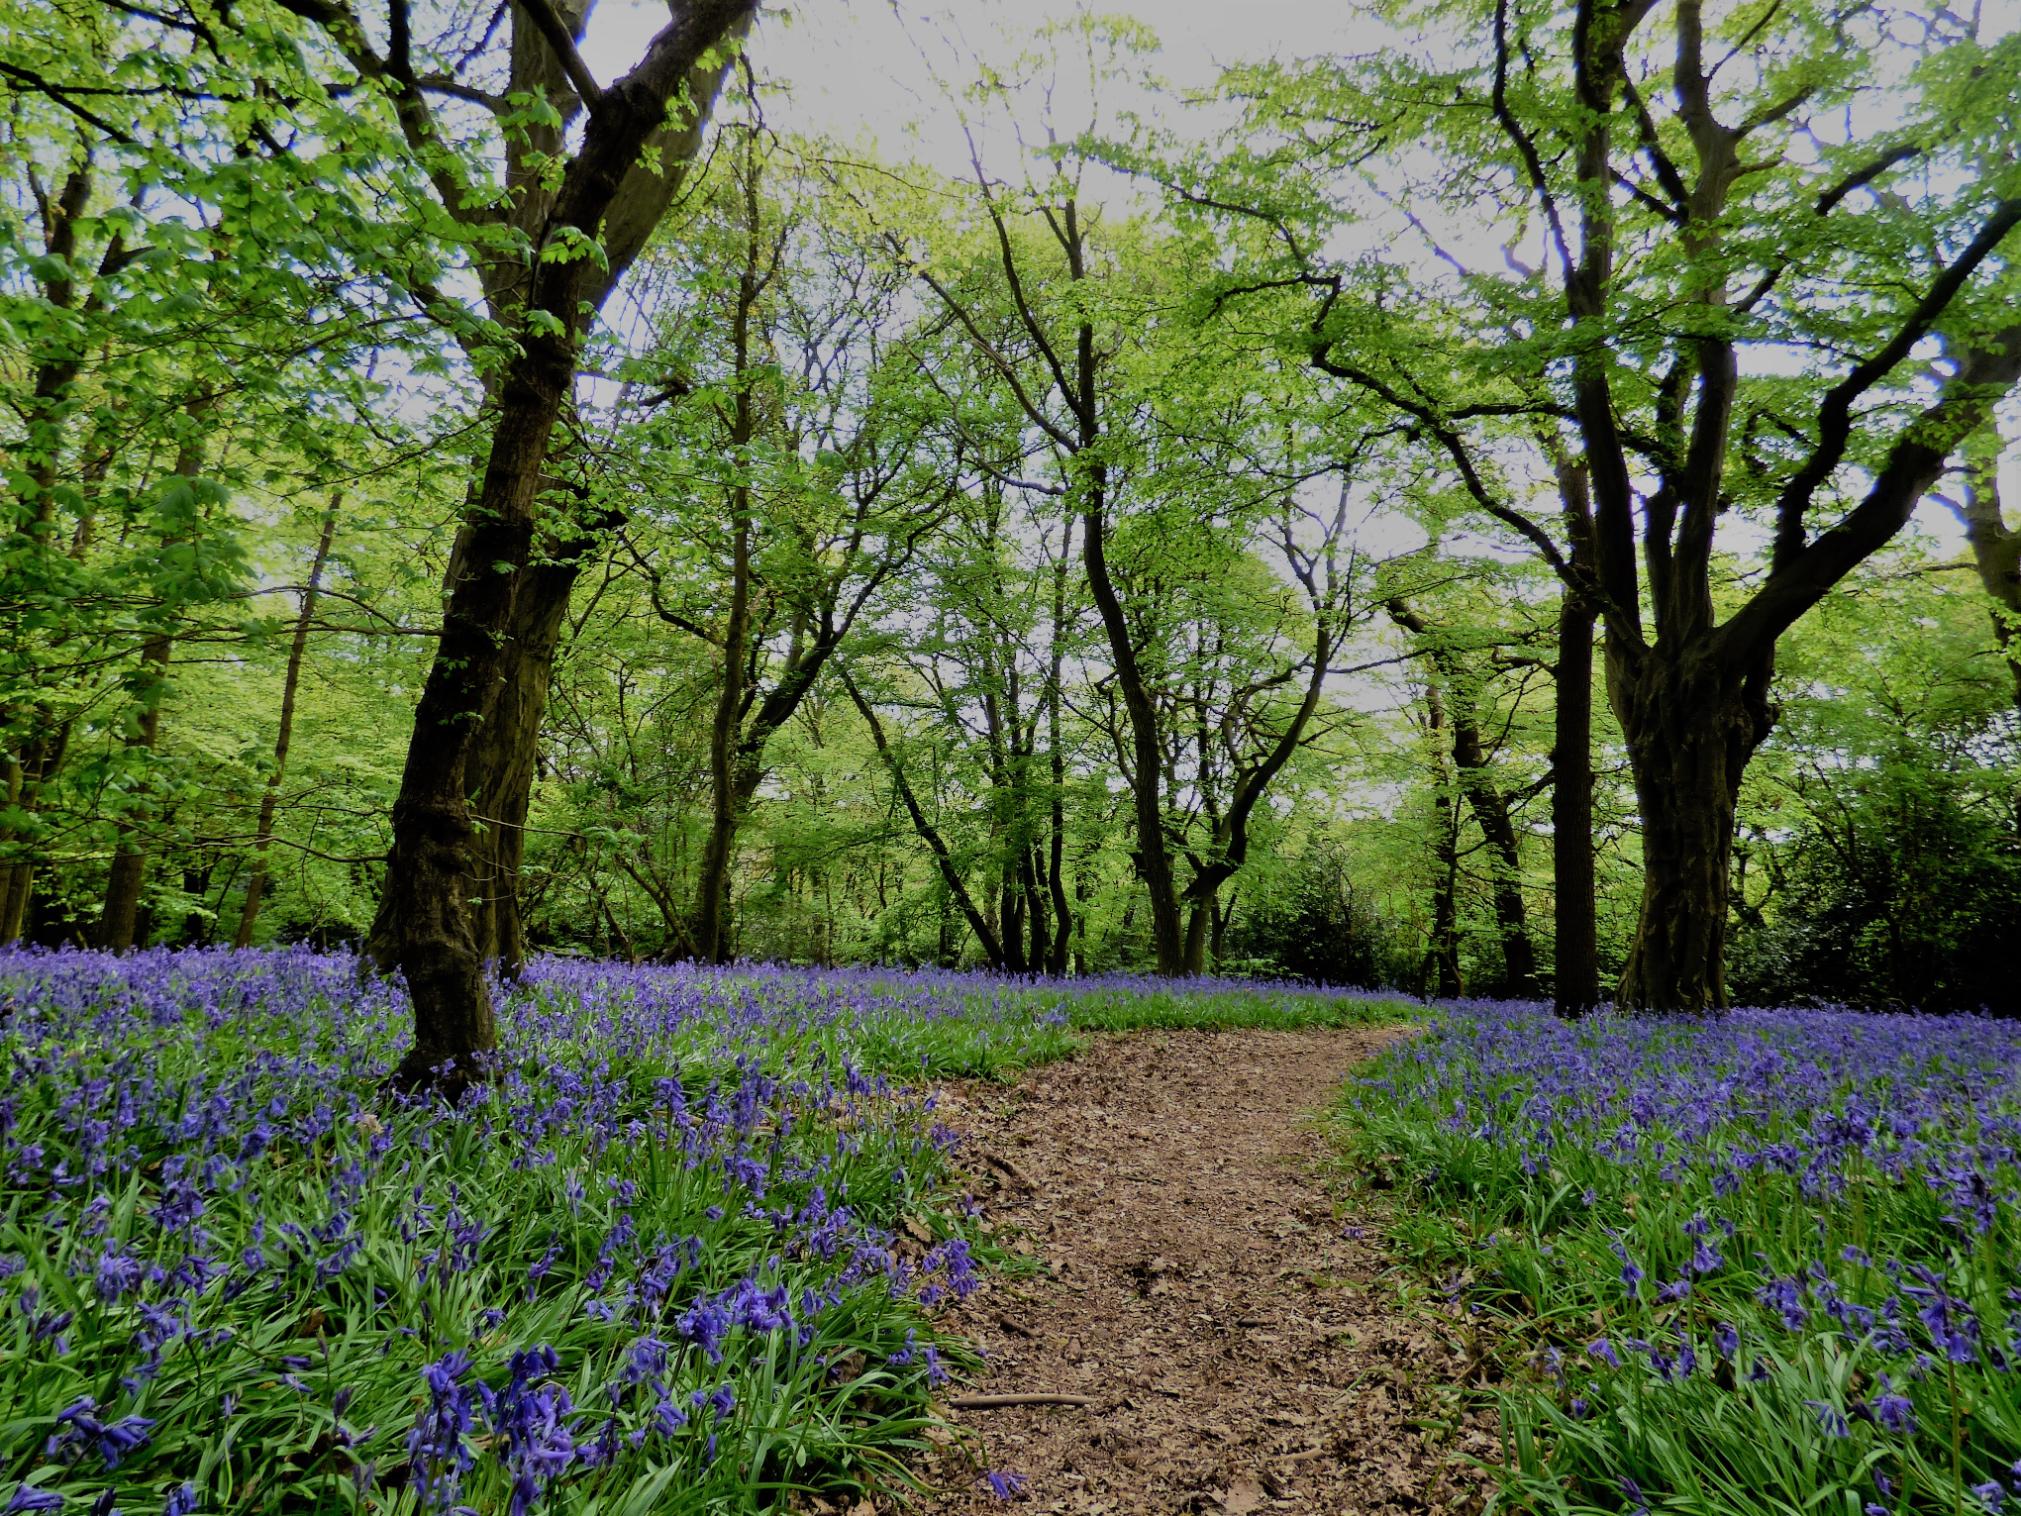 The bluebells of Epping Forest. Photo: Getty